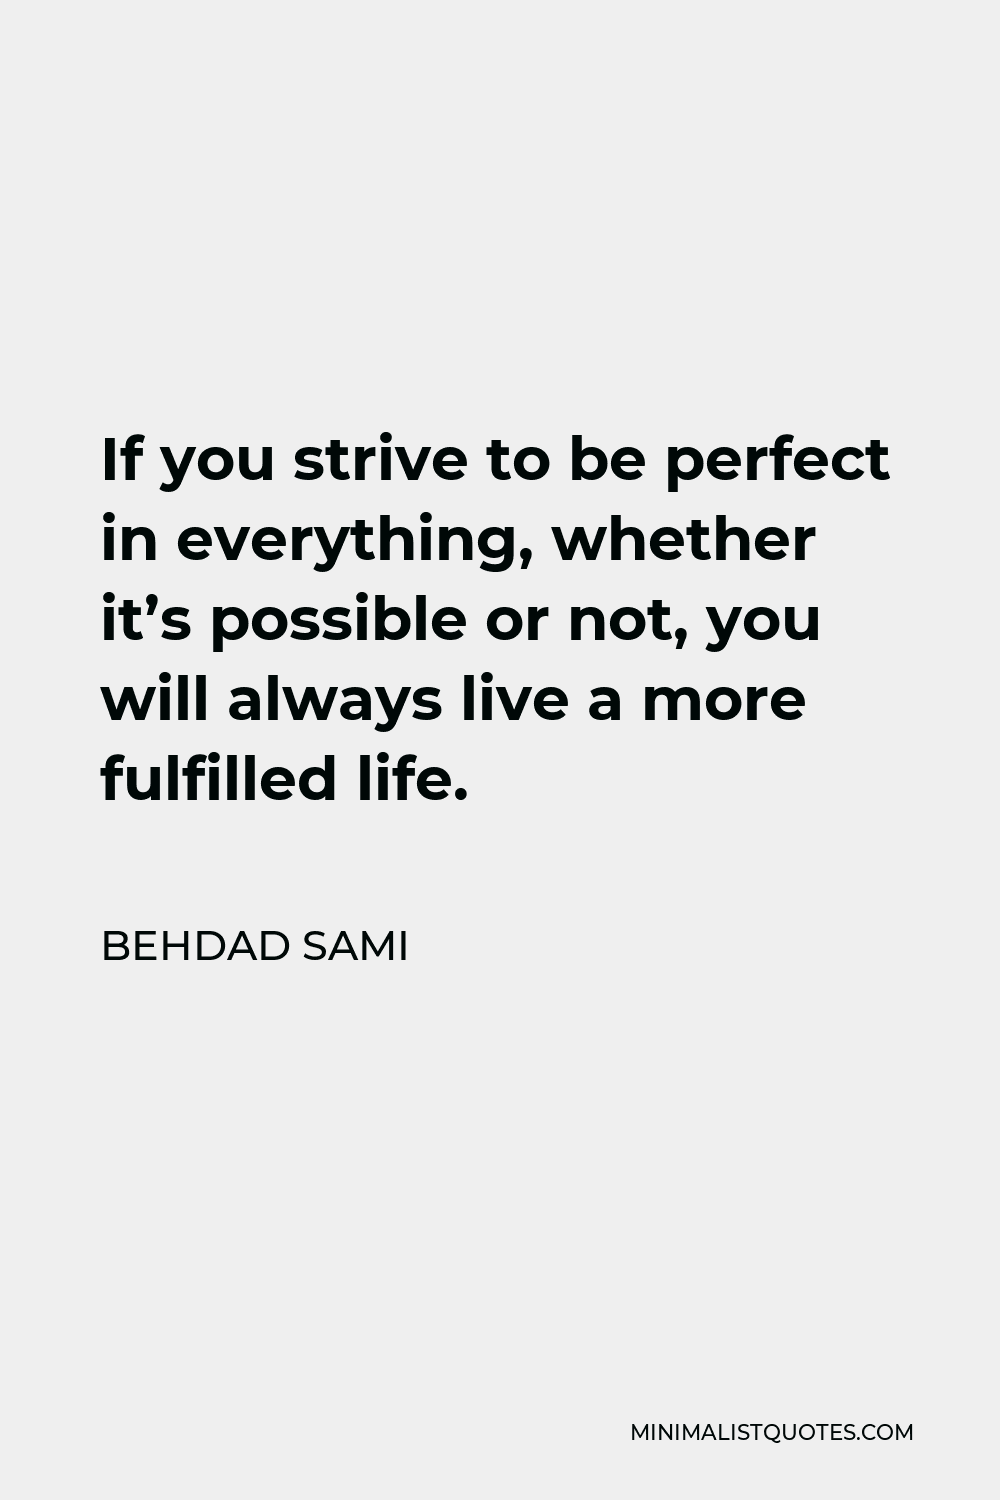 Behdad Sami Quote - If you strive to be perfect in everything, whether it’s possible or not, you will always live a more fulfilled life.